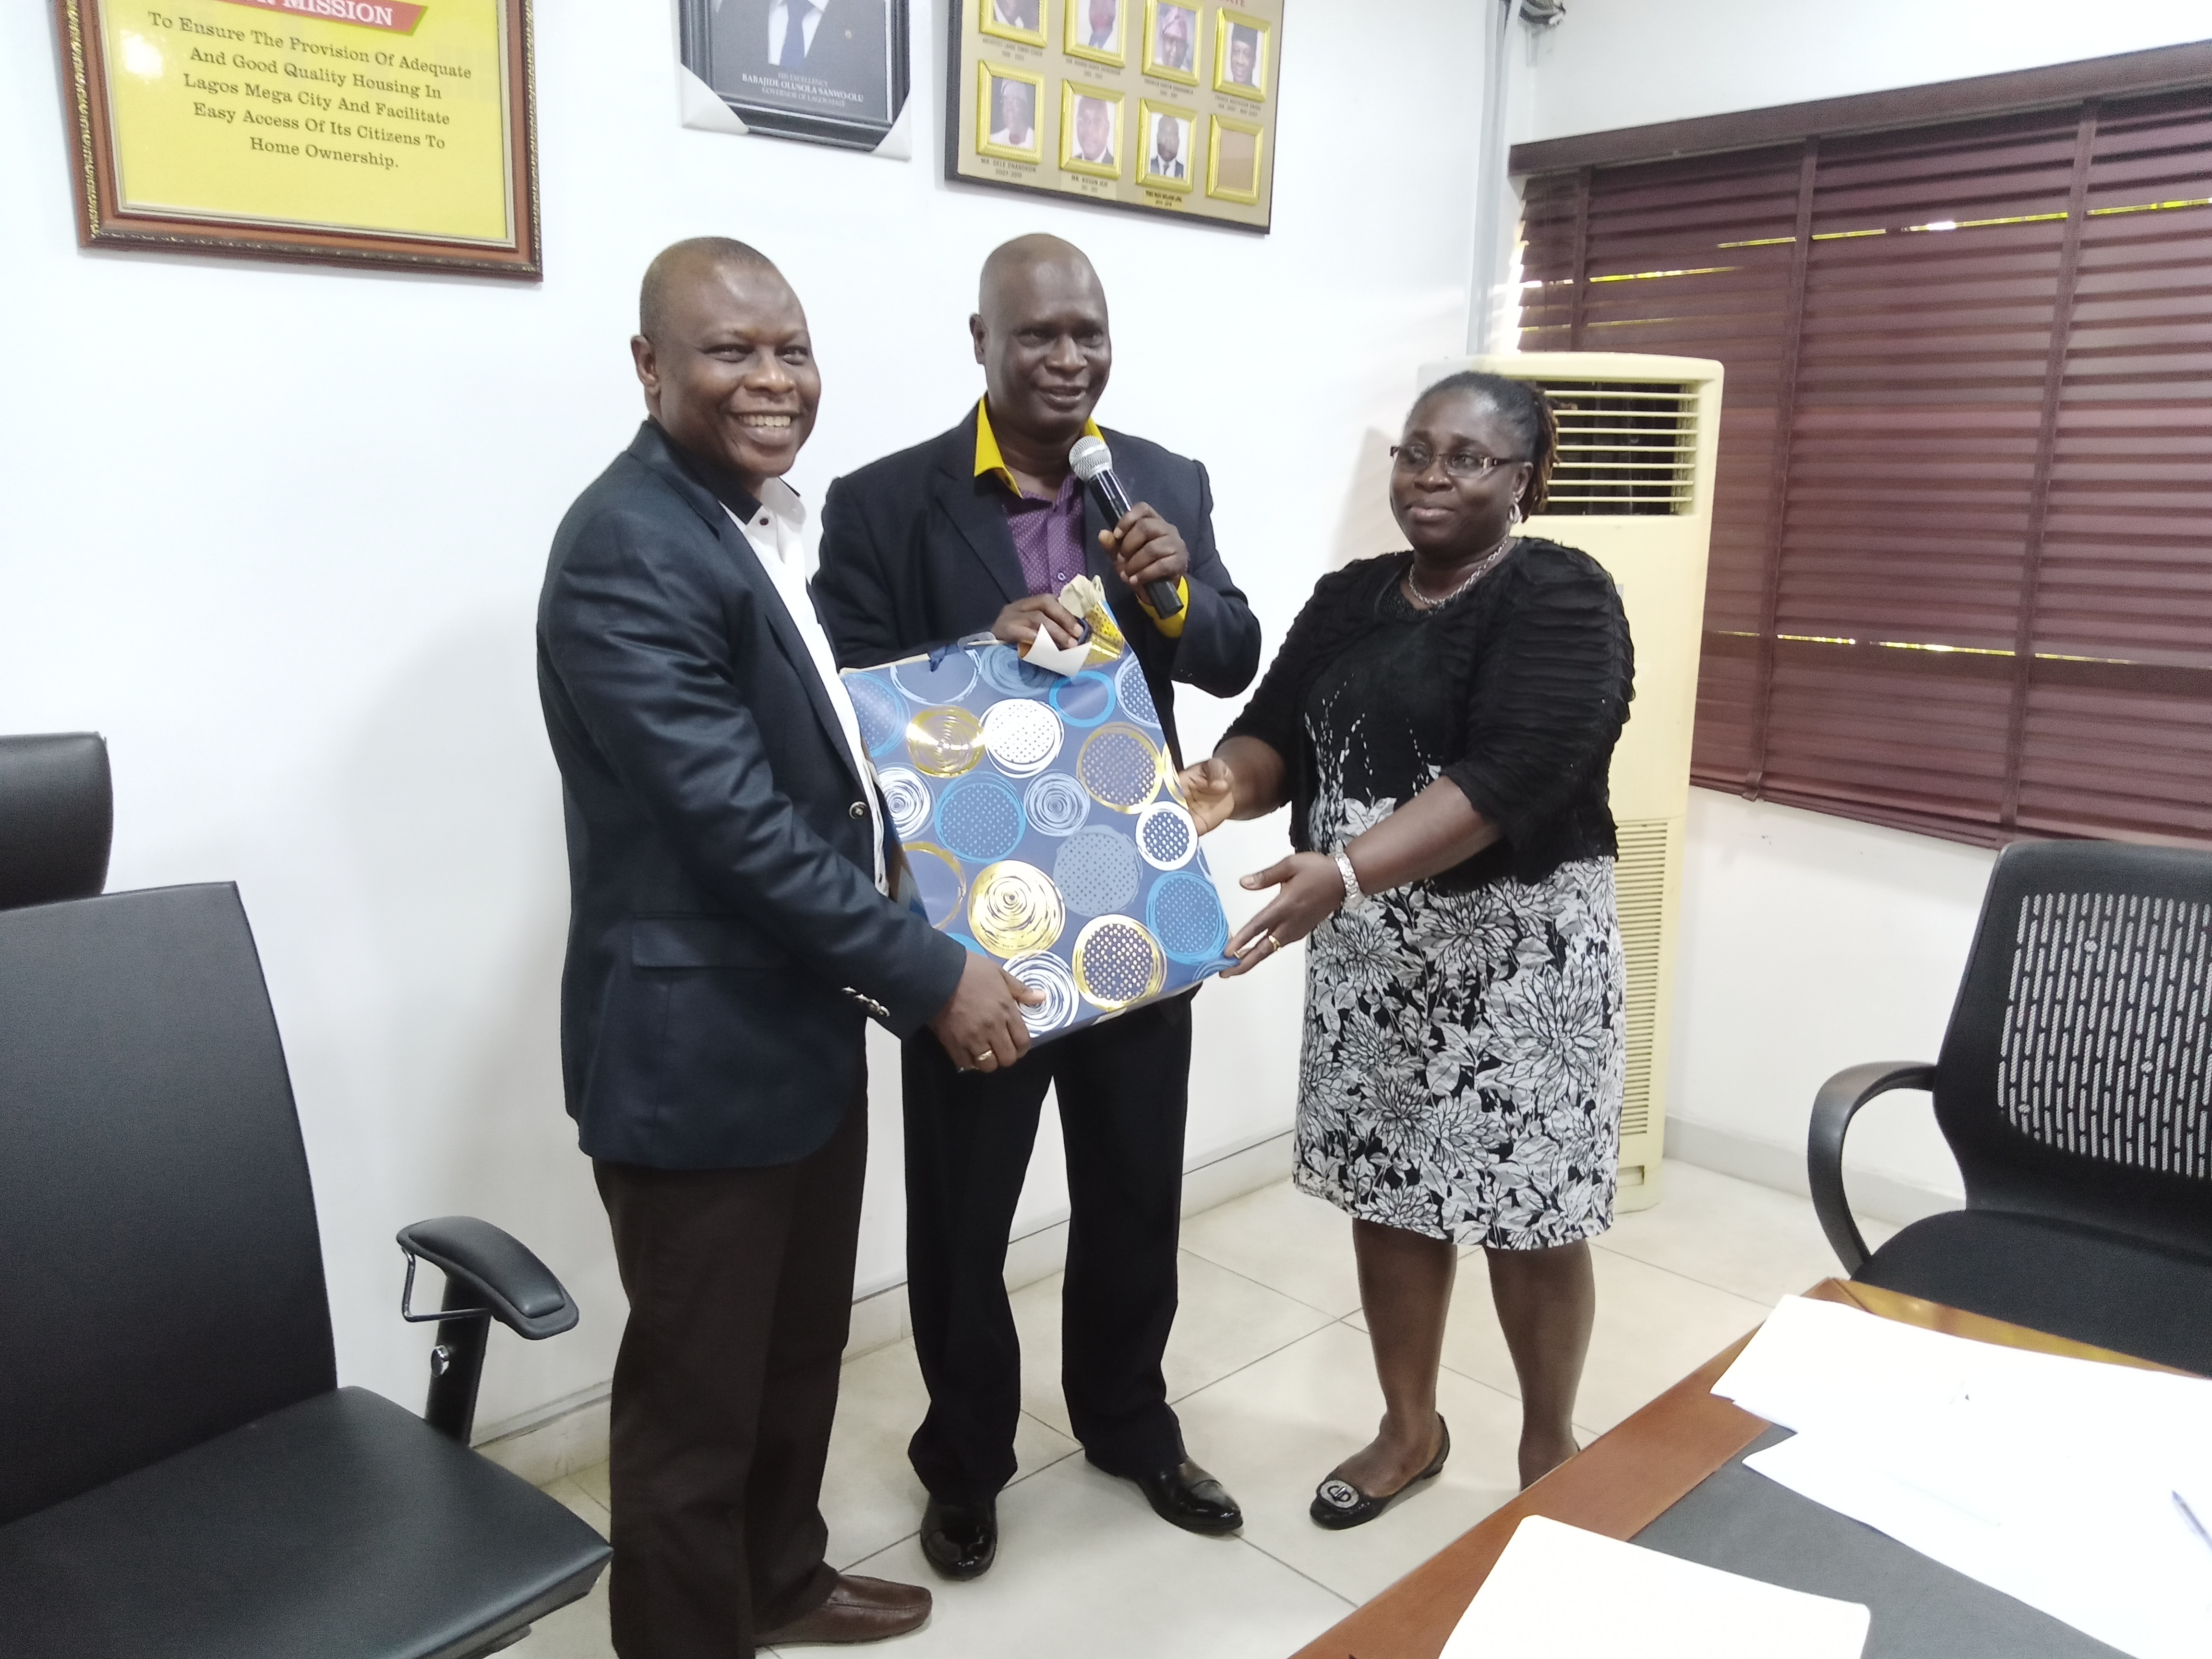 NTDA SEEKS COLLABORATION WITH MINISTRY OF HOUSING